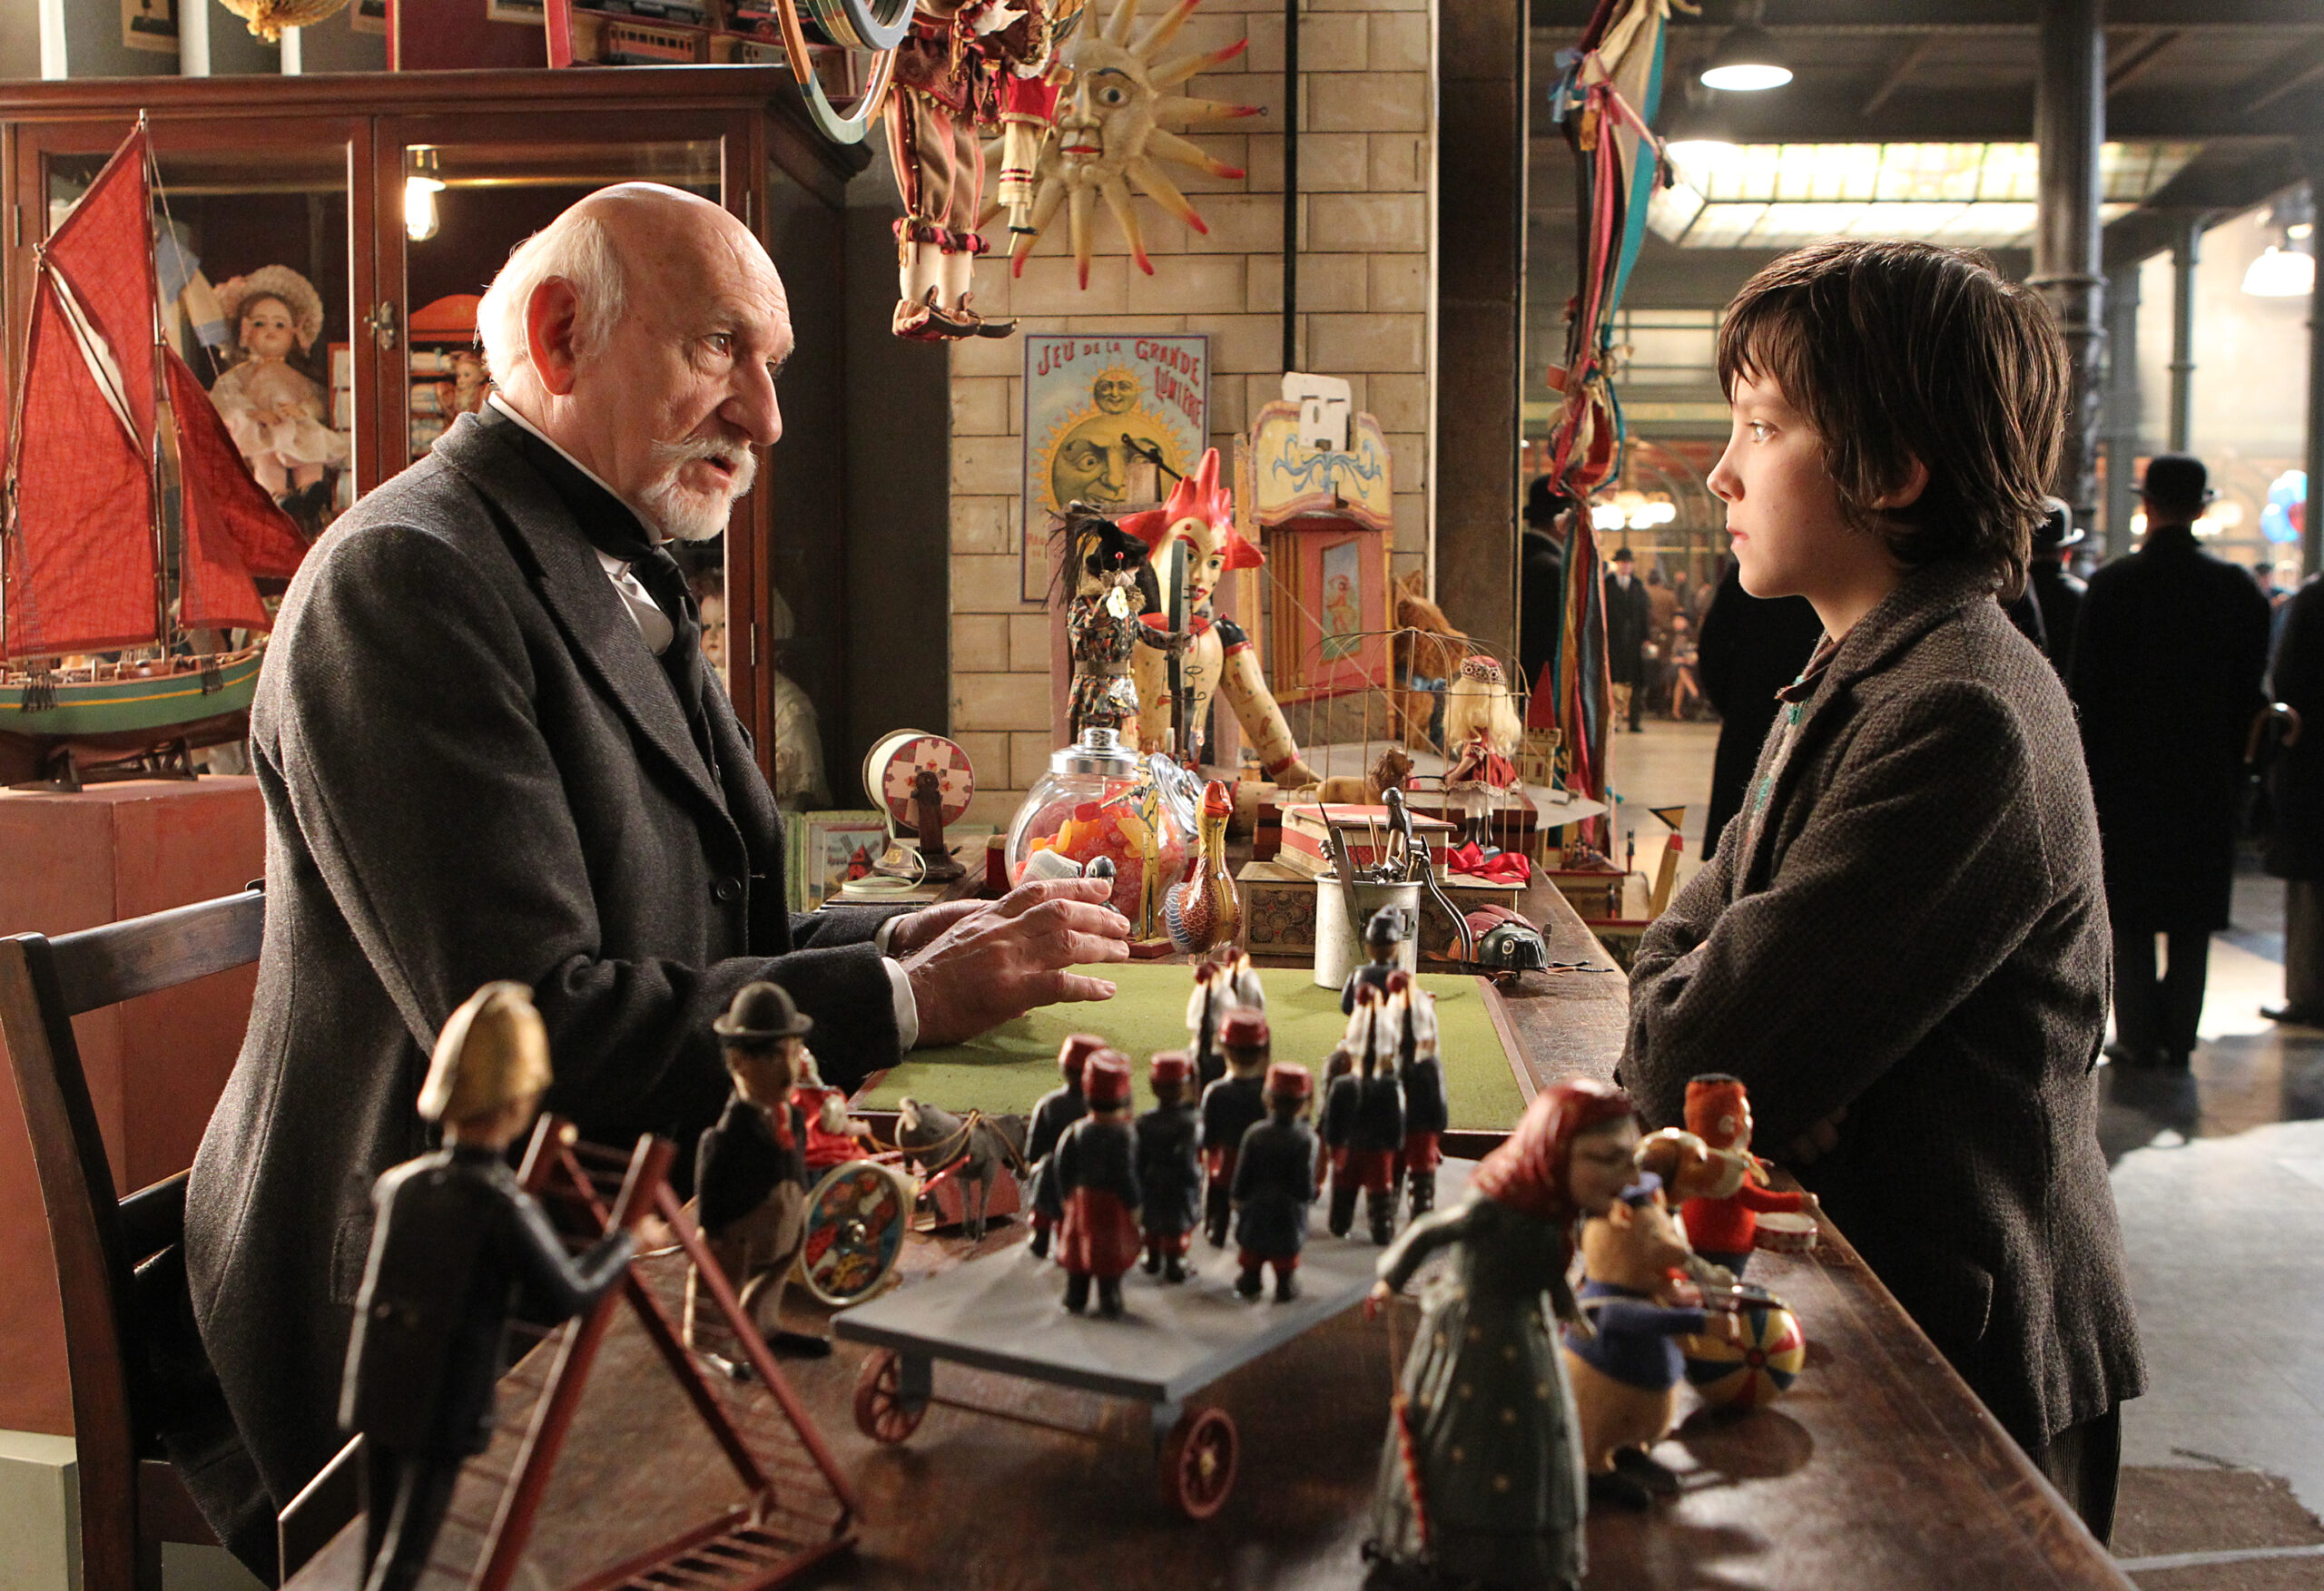 HUGO - Directed by Martin Scorsese - Int. Montparnasse Station, Toy Store, Stage Set - ©2011 - Sony Pictures